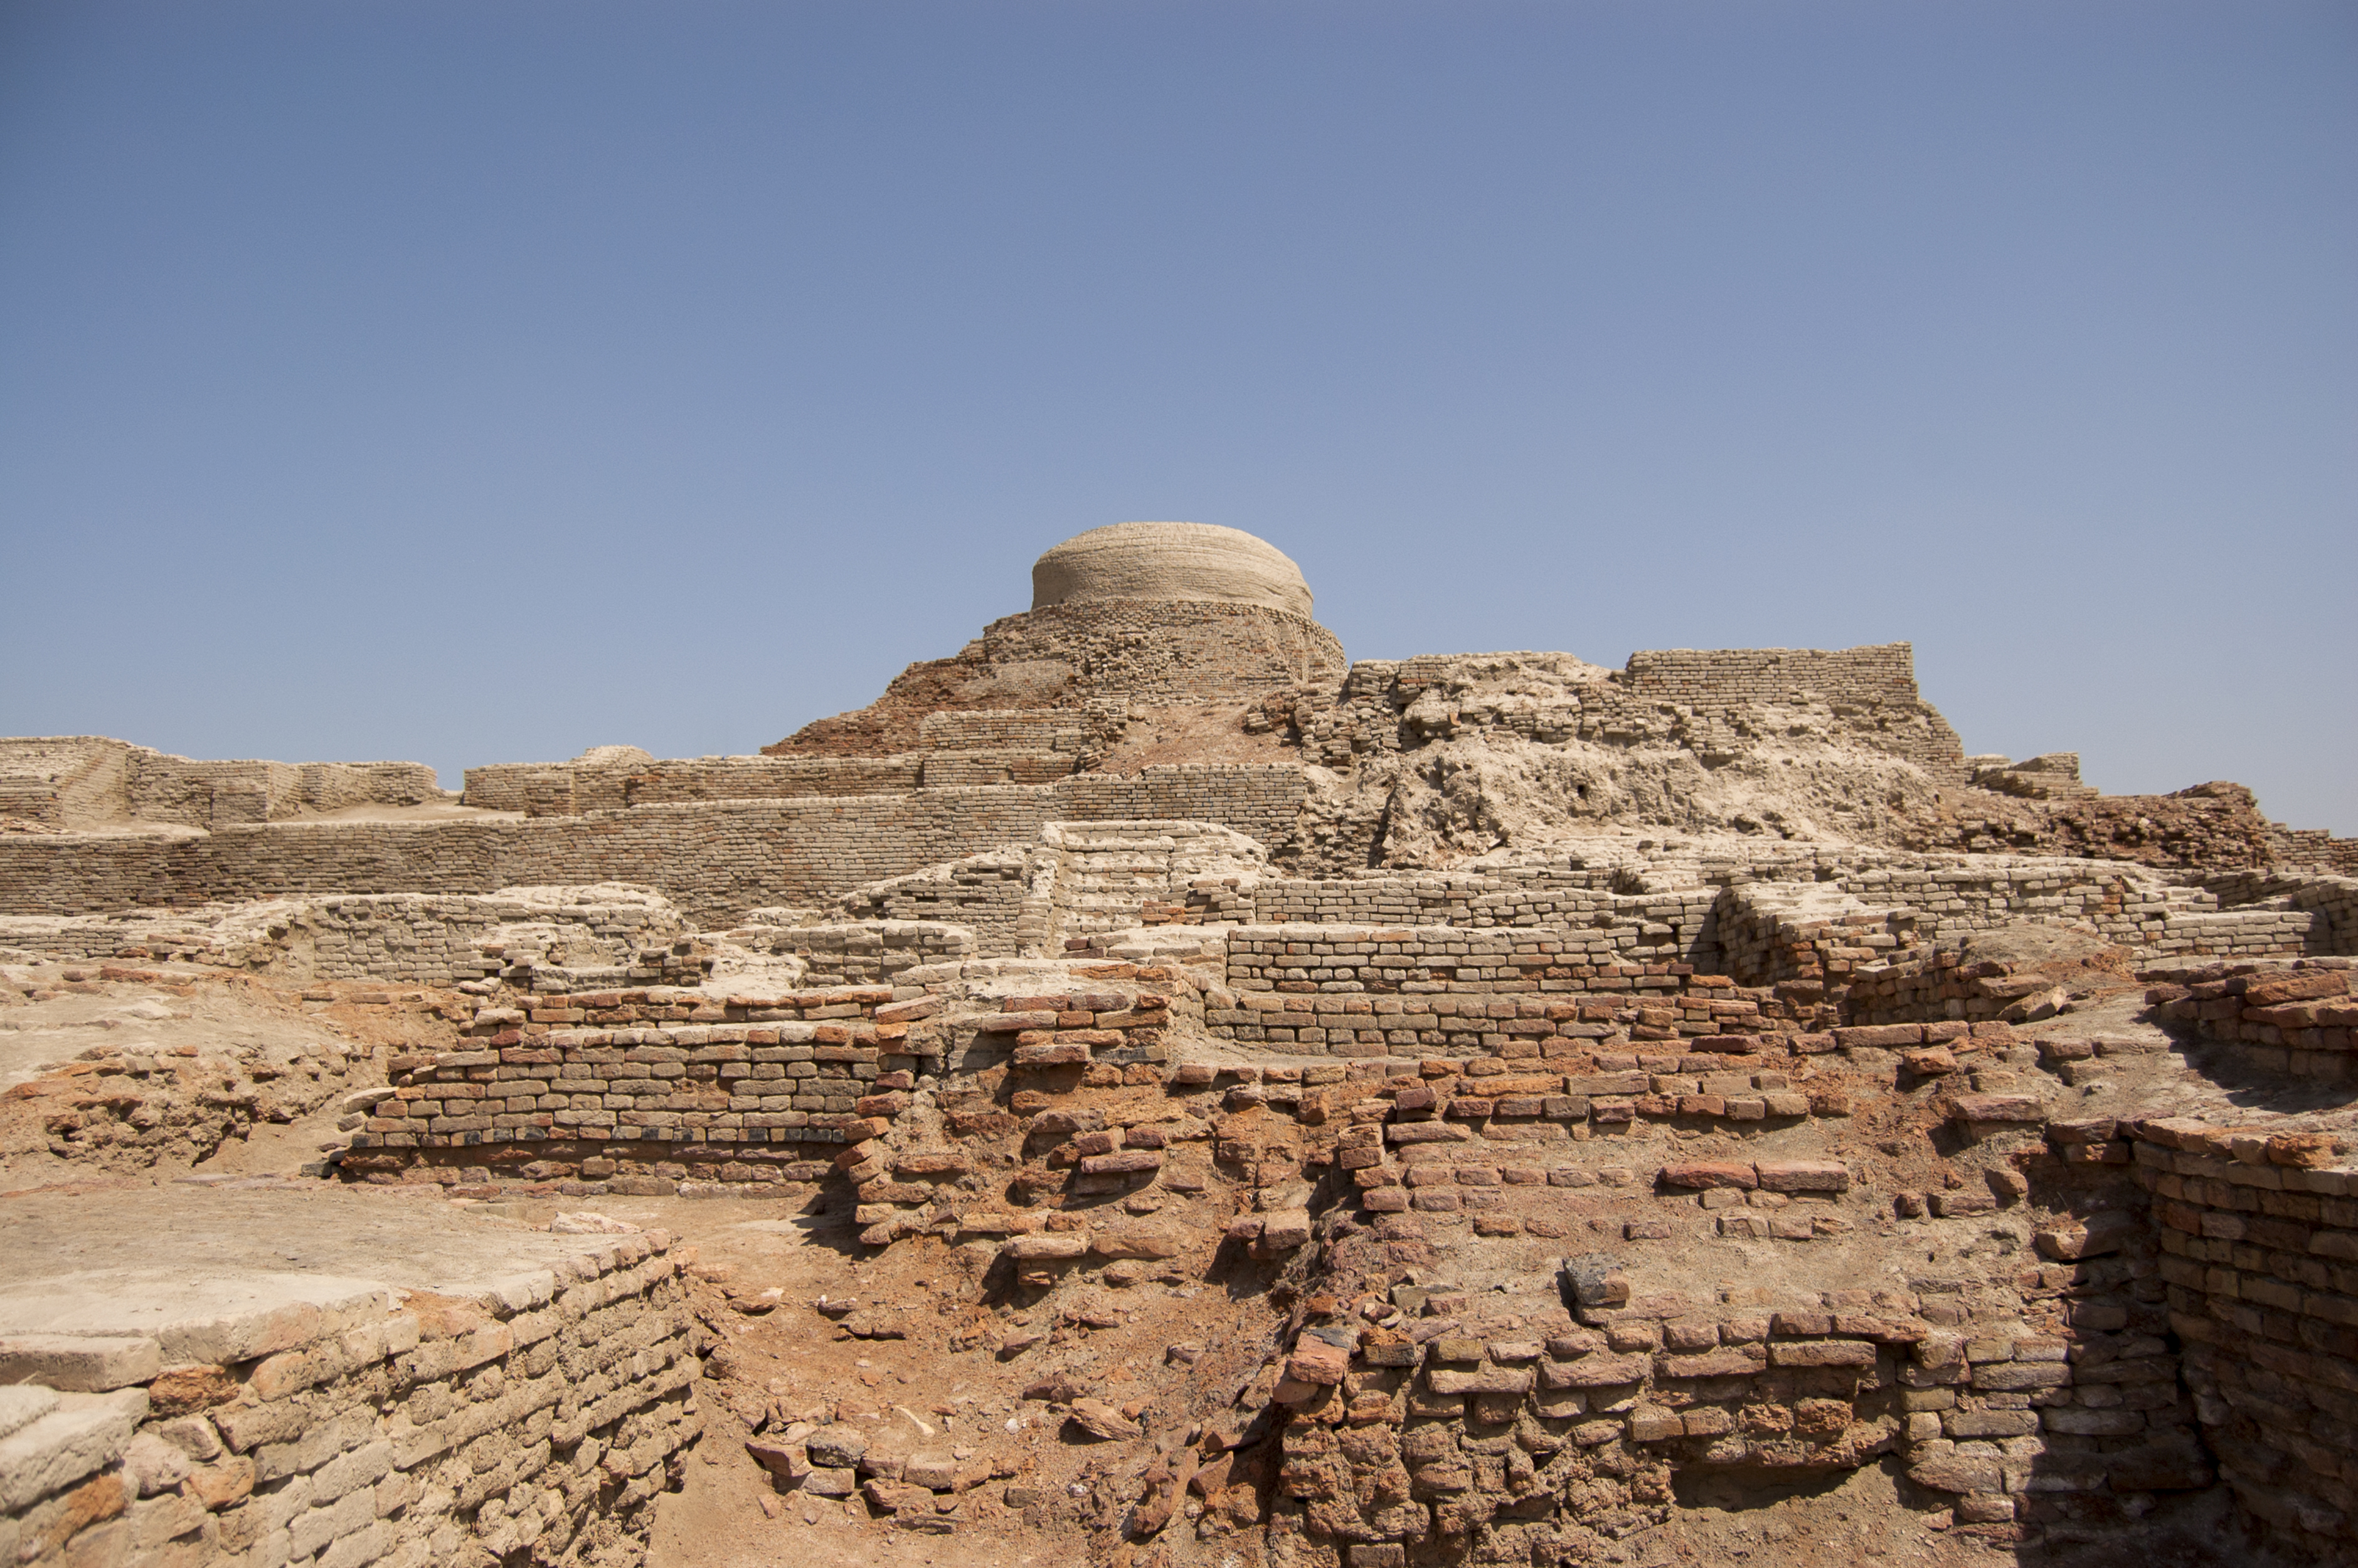 Mohenjodaro, one of the primary sites of the Indus Valley Civilization.